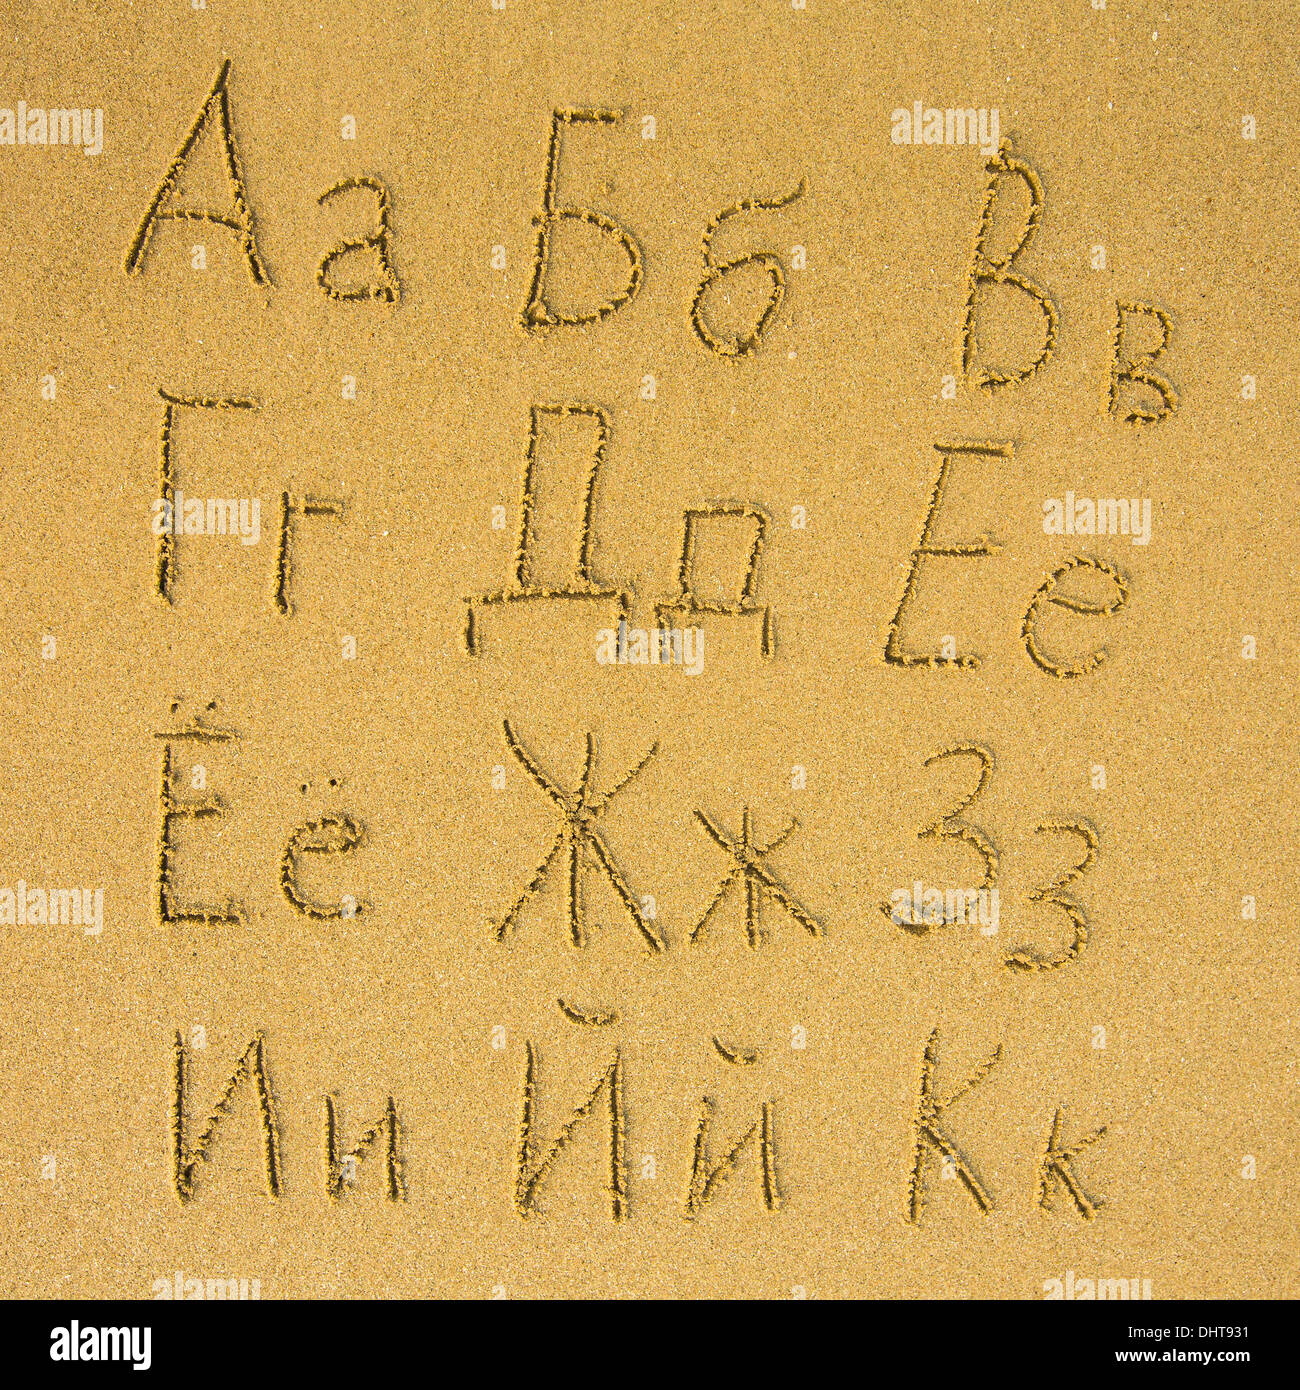 Russian alphabet (from A to K) written on a sand beach. Stock Photo